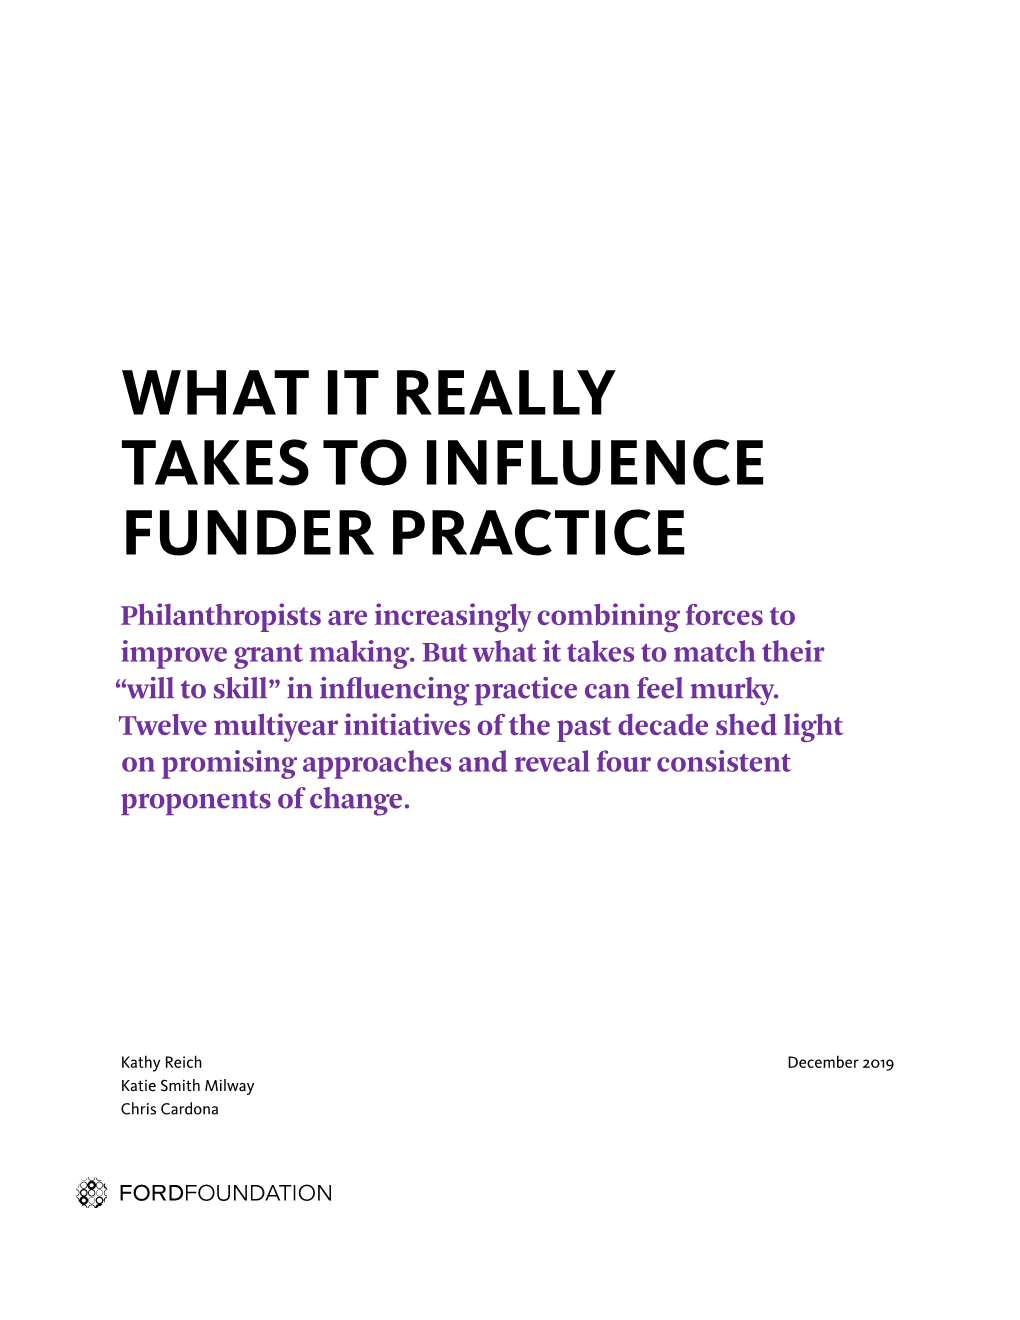 What It Really Takes to Influence Funder Practice